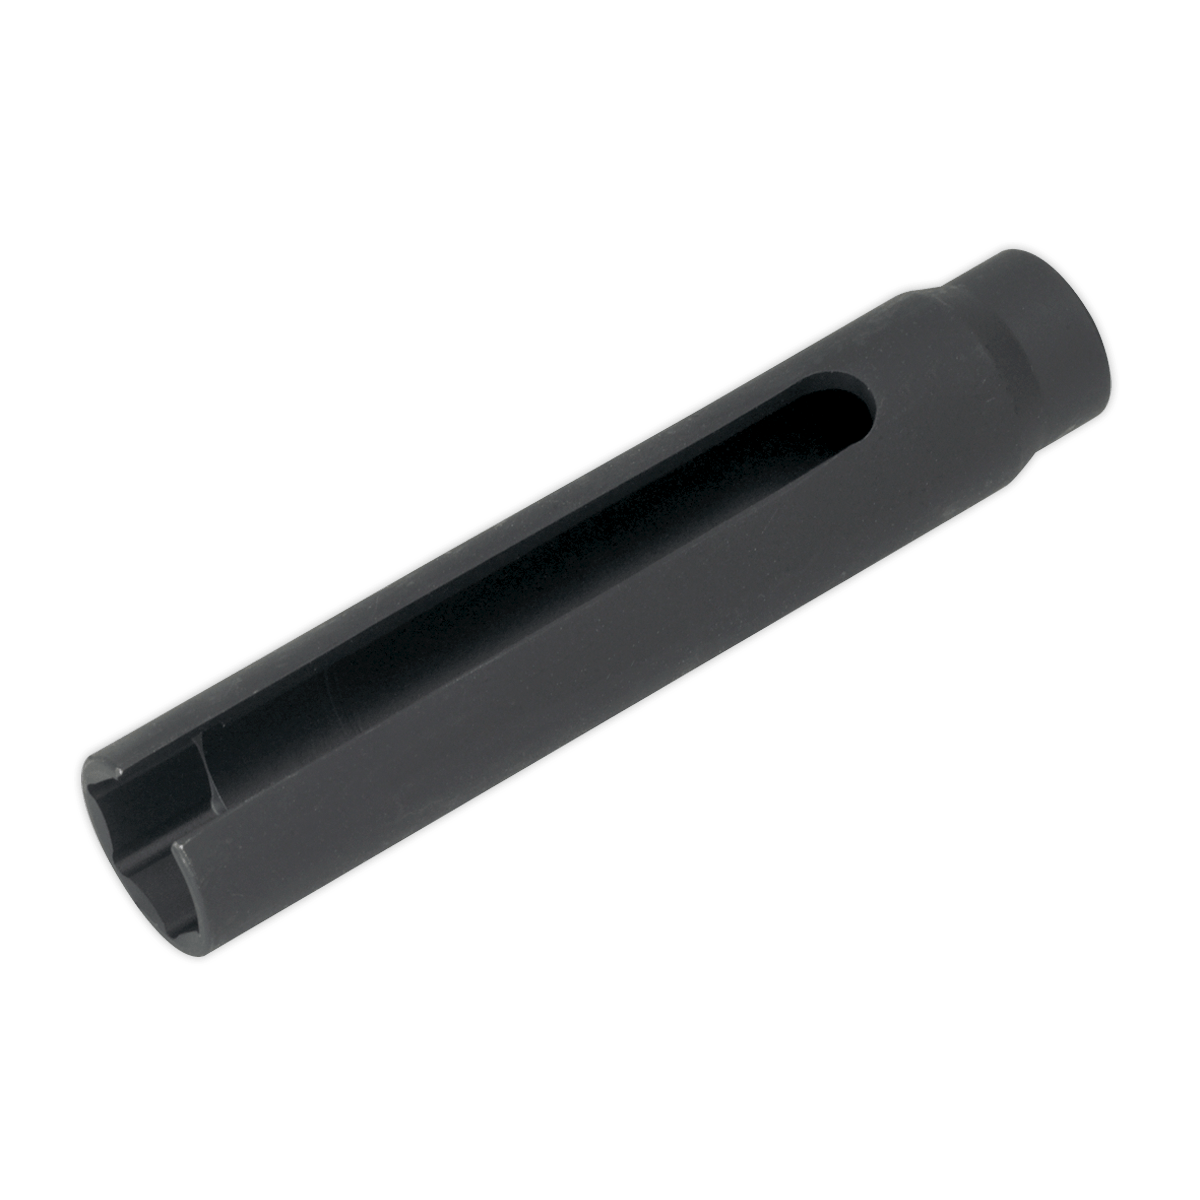 Extra-Long Oxygen Sensor Socket 22mm 1/2"Sq Drive | Suitable for deep-seated and longer type oxygen sensors found on modern vehicles. | toolforce.ie